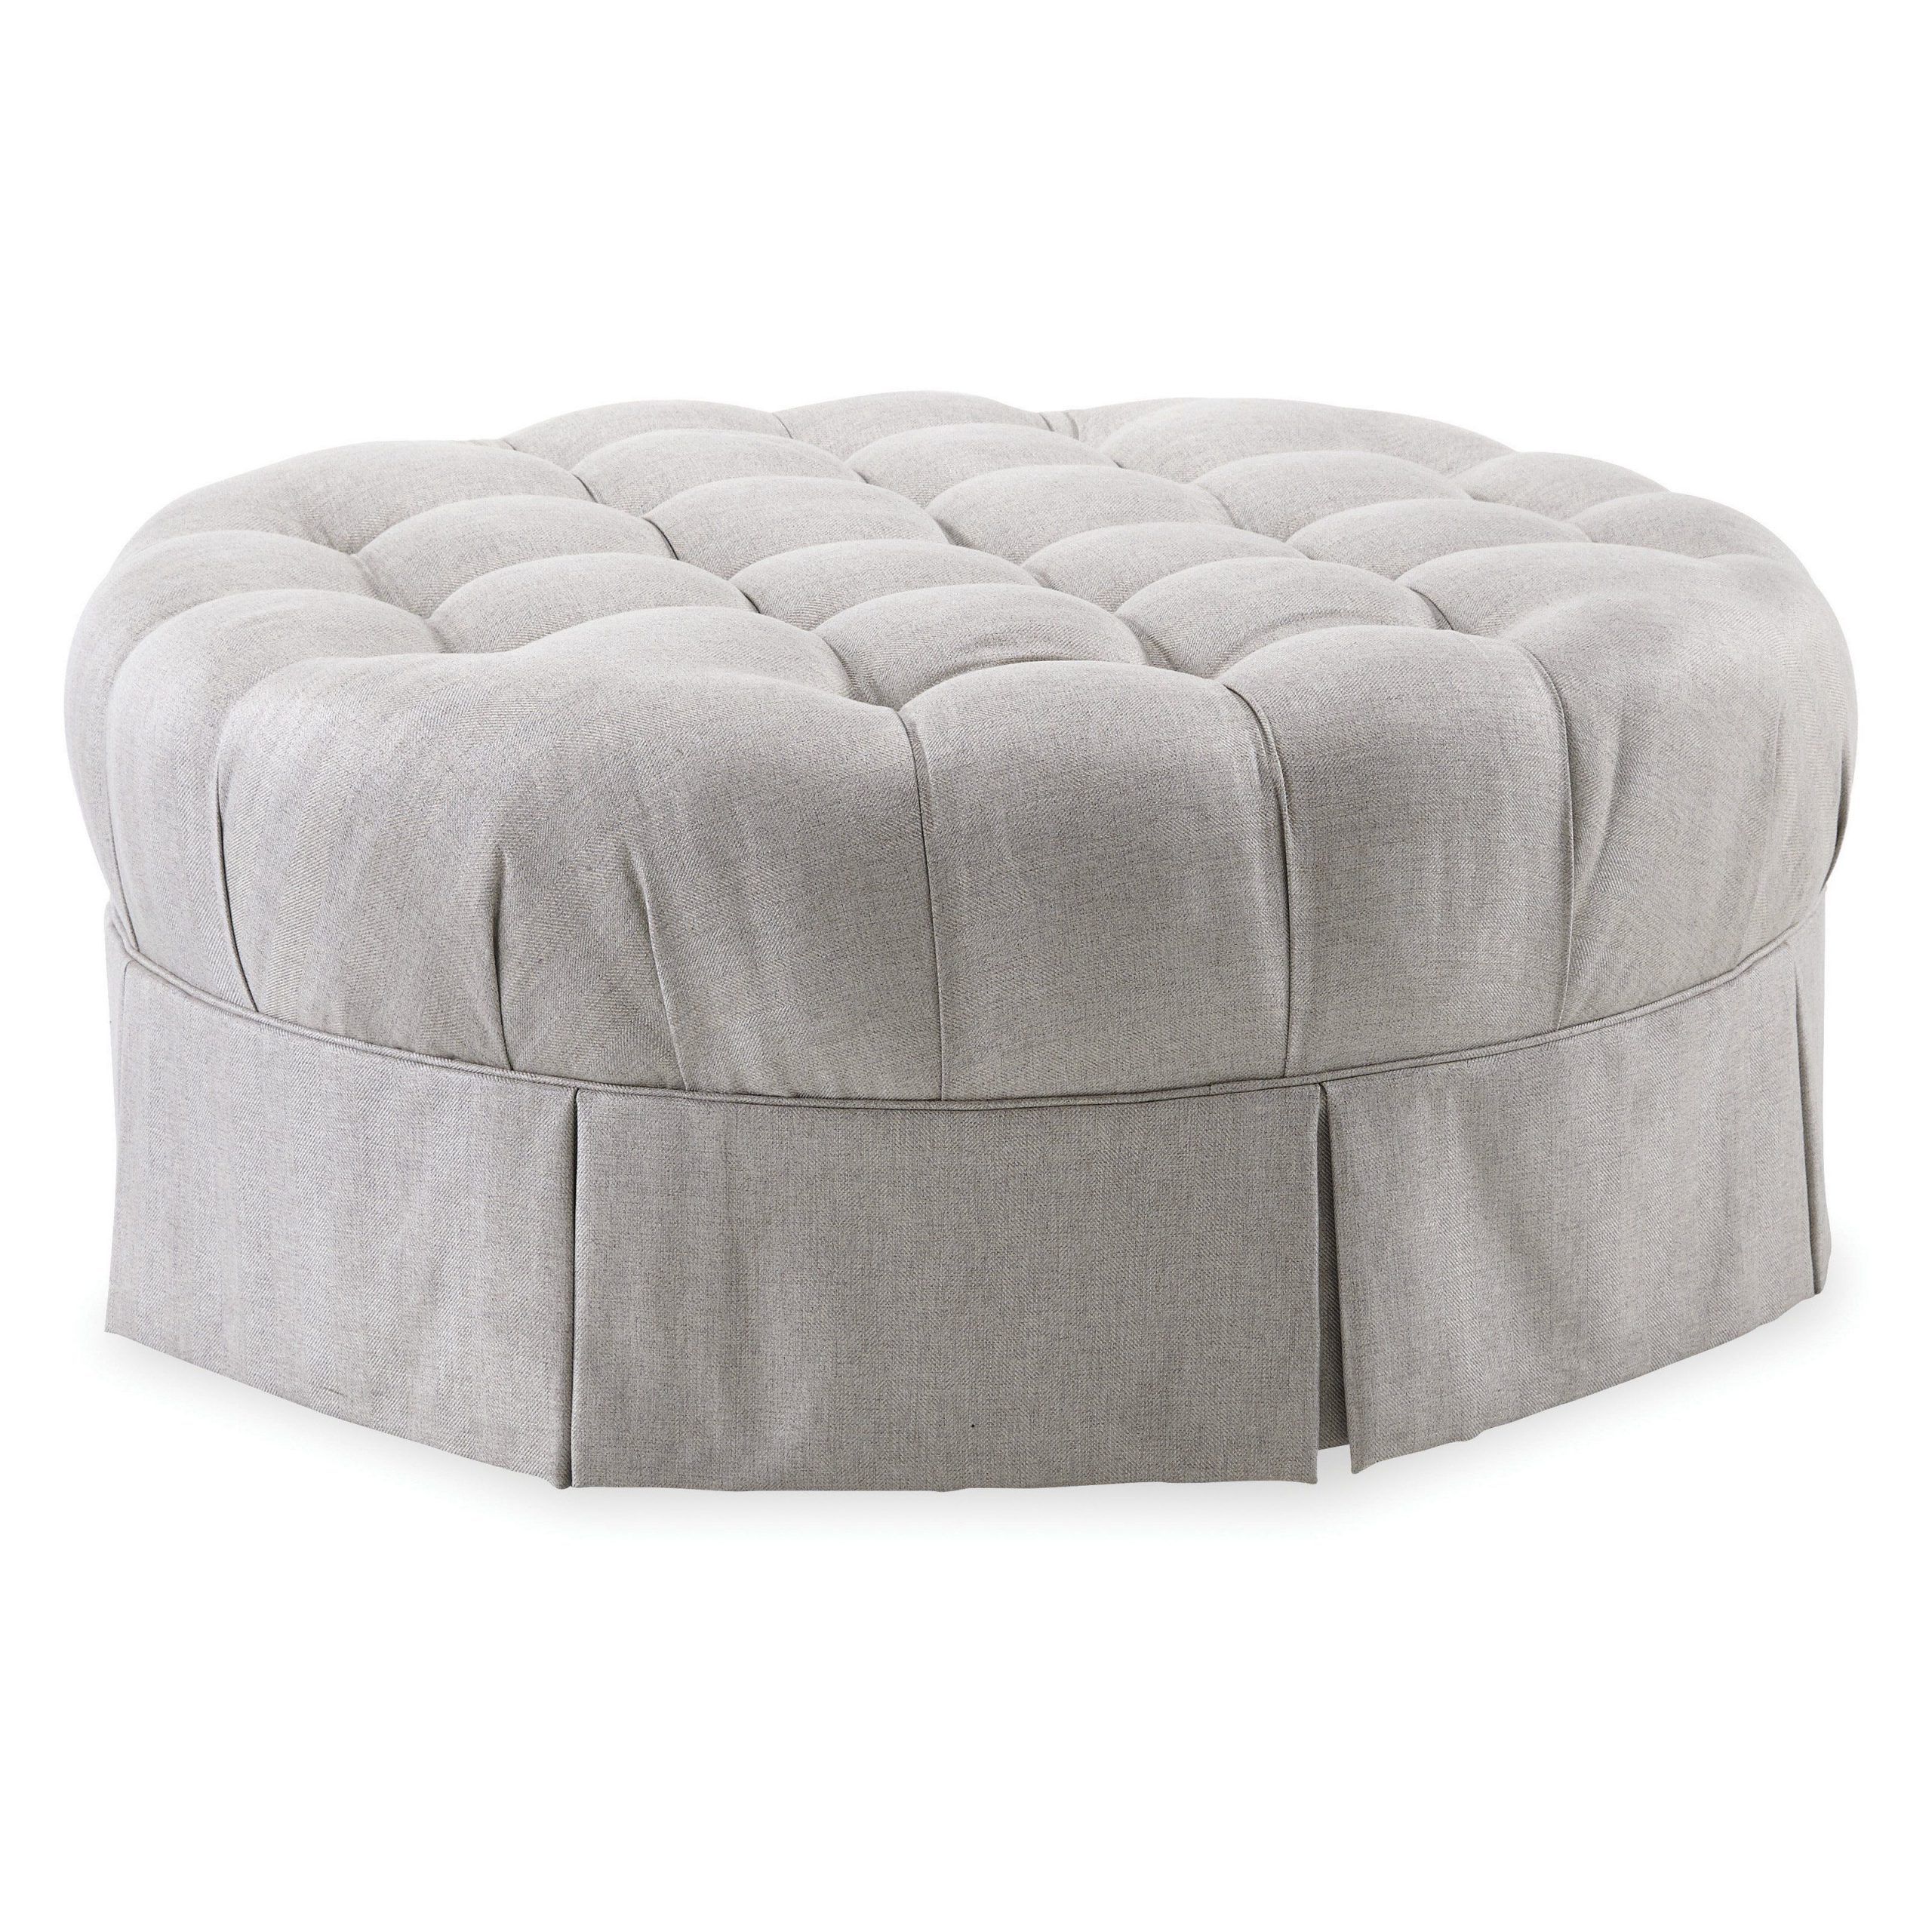 A.r.t. Furniture Ava Grey Round Tufted Ottoman | Www (View 17 of 20)